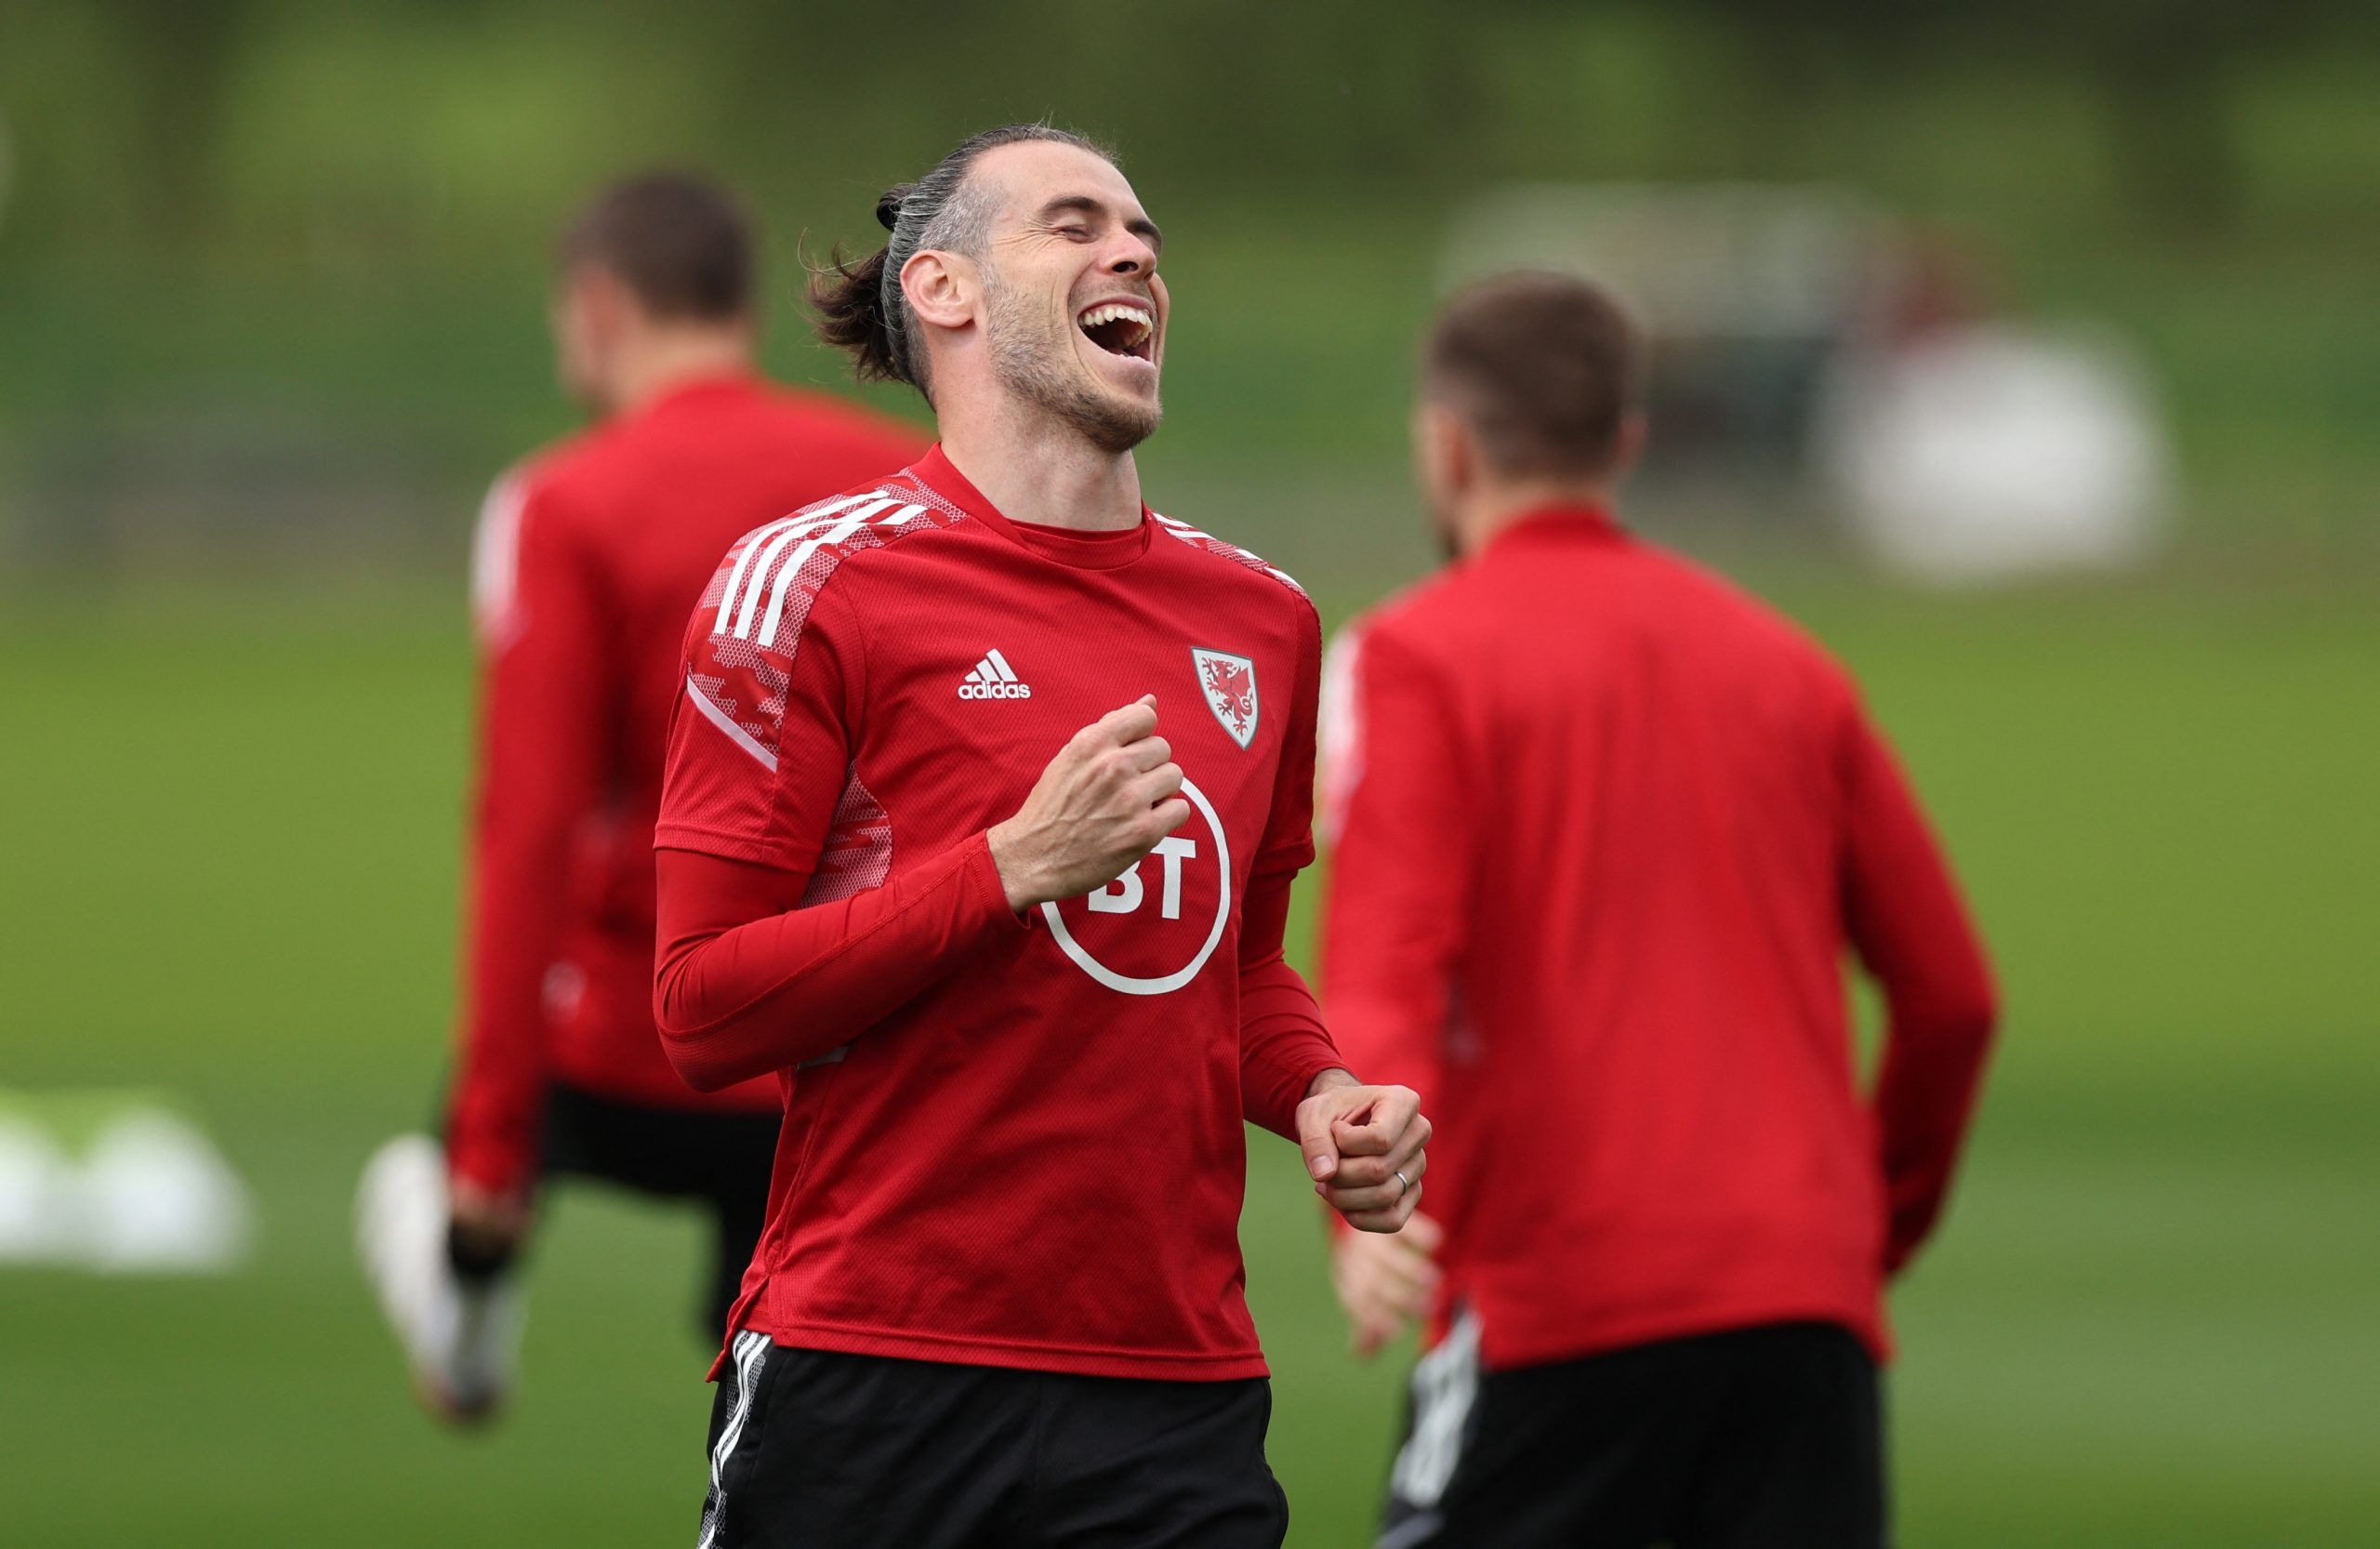 Soccer Football - UEFA Nations League - Wales Training - Cardiff, Wales, Britain - June 13, 2022 Wales' Gareth Bale during training Action Images via Reuters/Matthew Childs